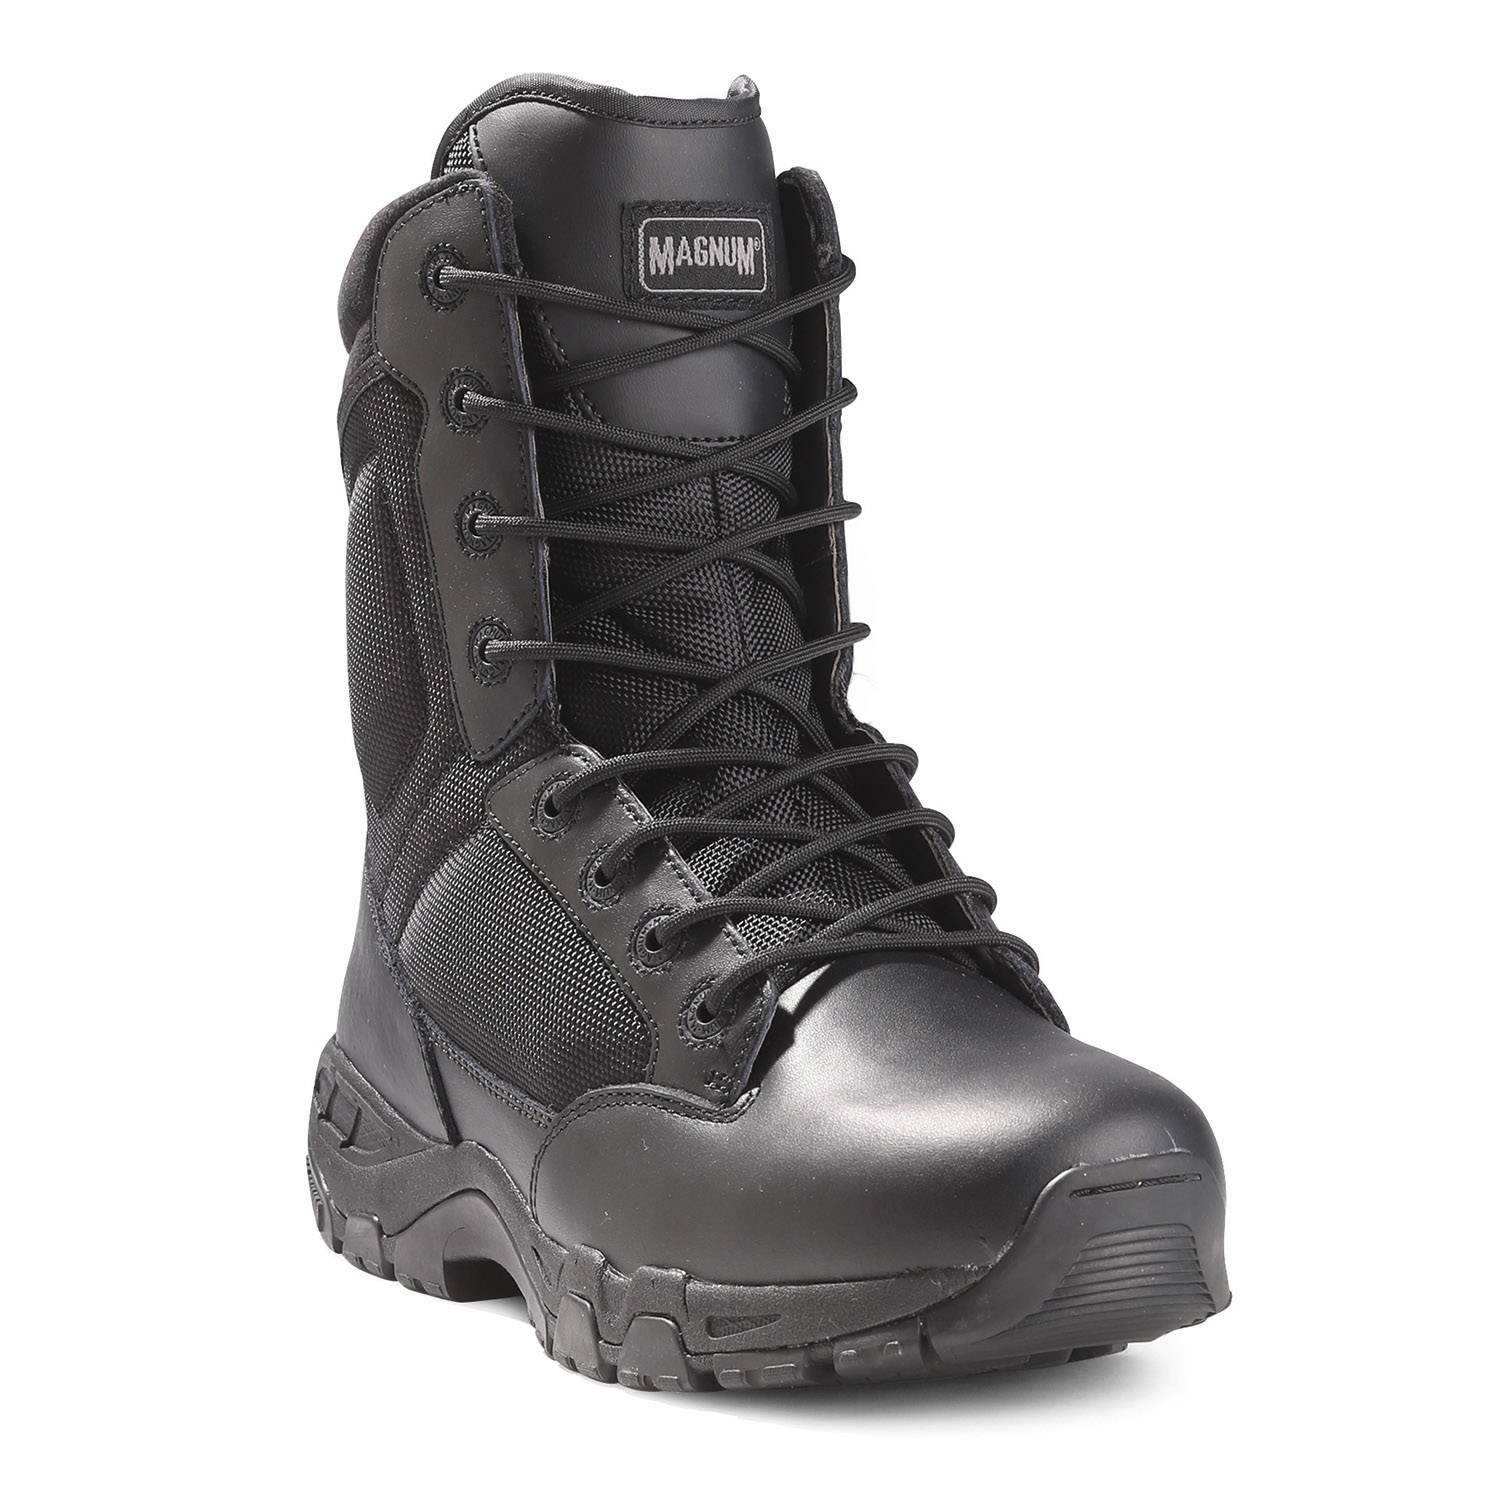 Magnum Viper Pro 8 inch Waterproof Insulated Duty Boots